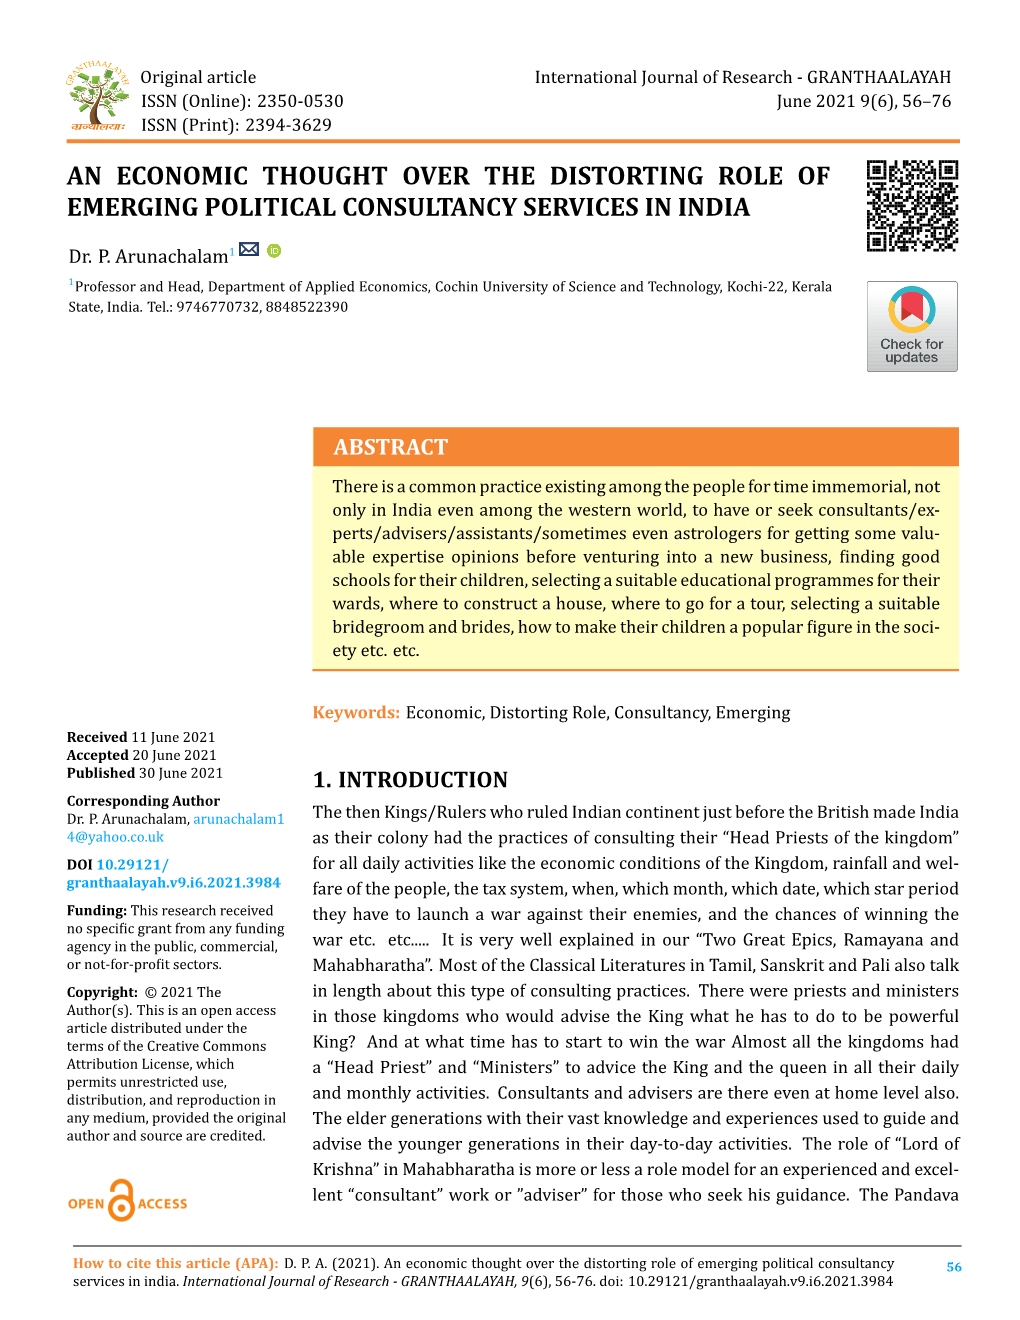 An Economic Thought Over the Distorting Role of Emerging Political Consultancy Services in India